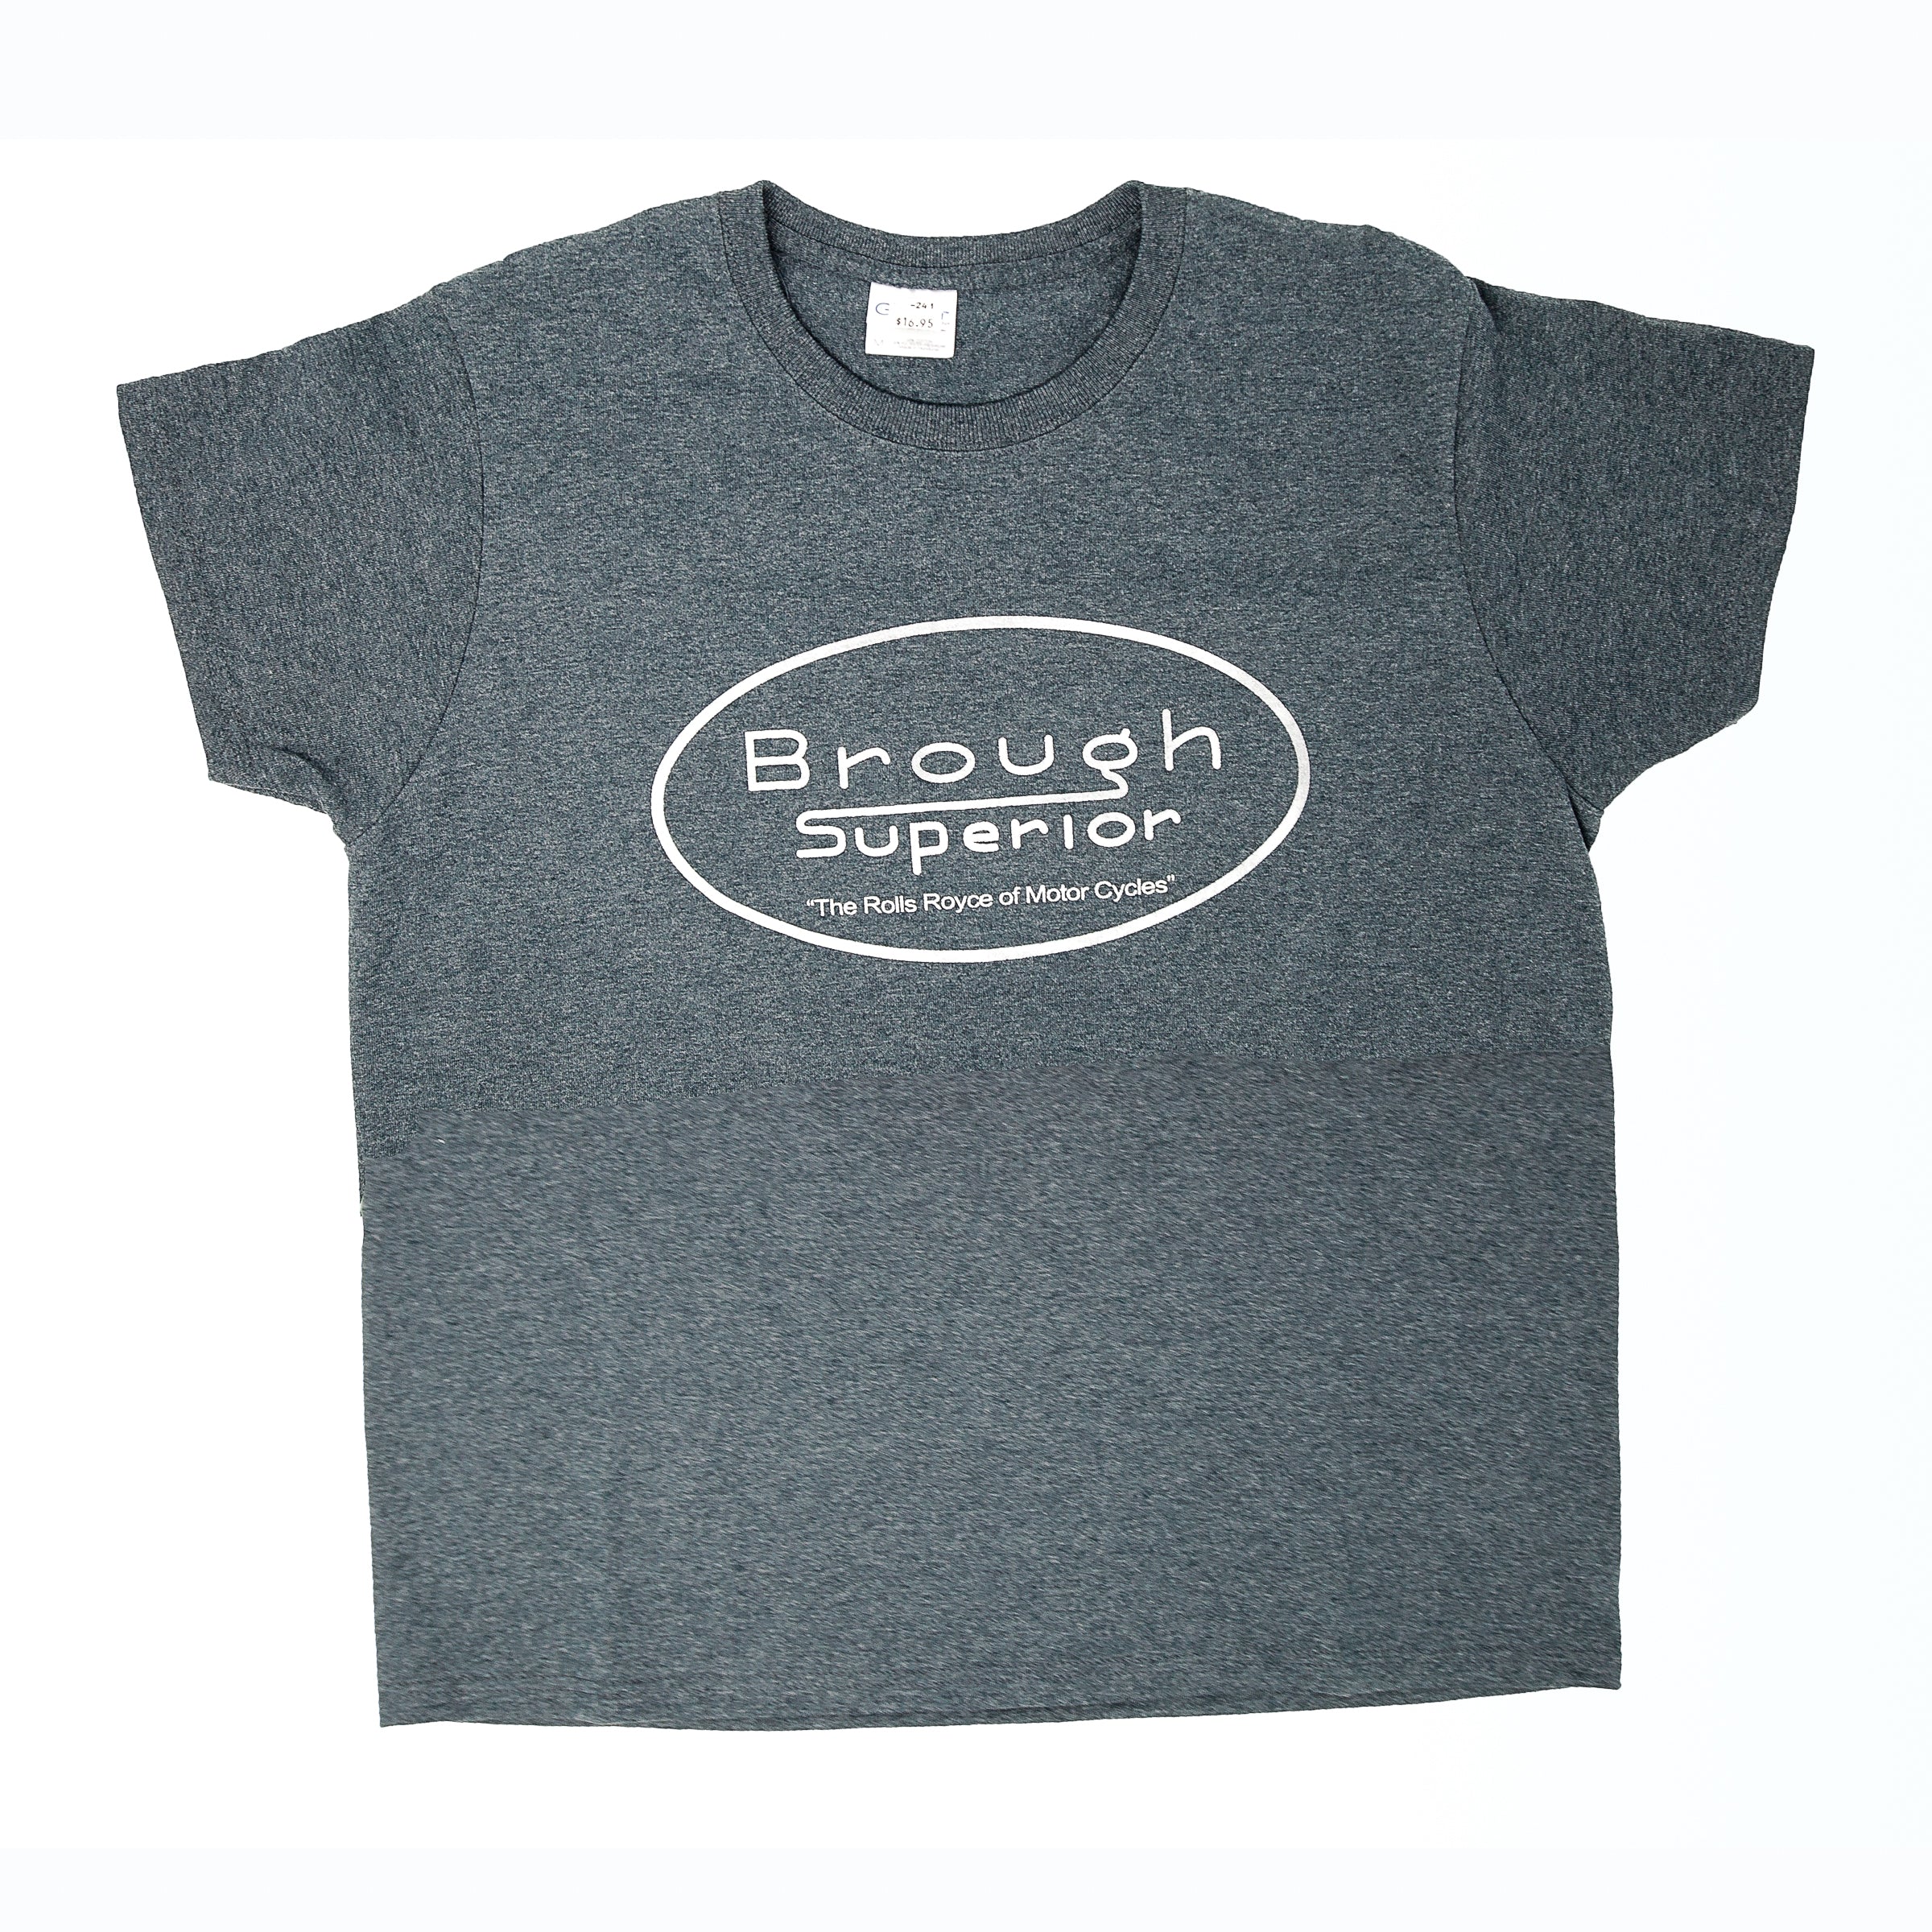 Dreamcycle Motorcycle Museum |  "Brough Superior" Tshirt on white background. 